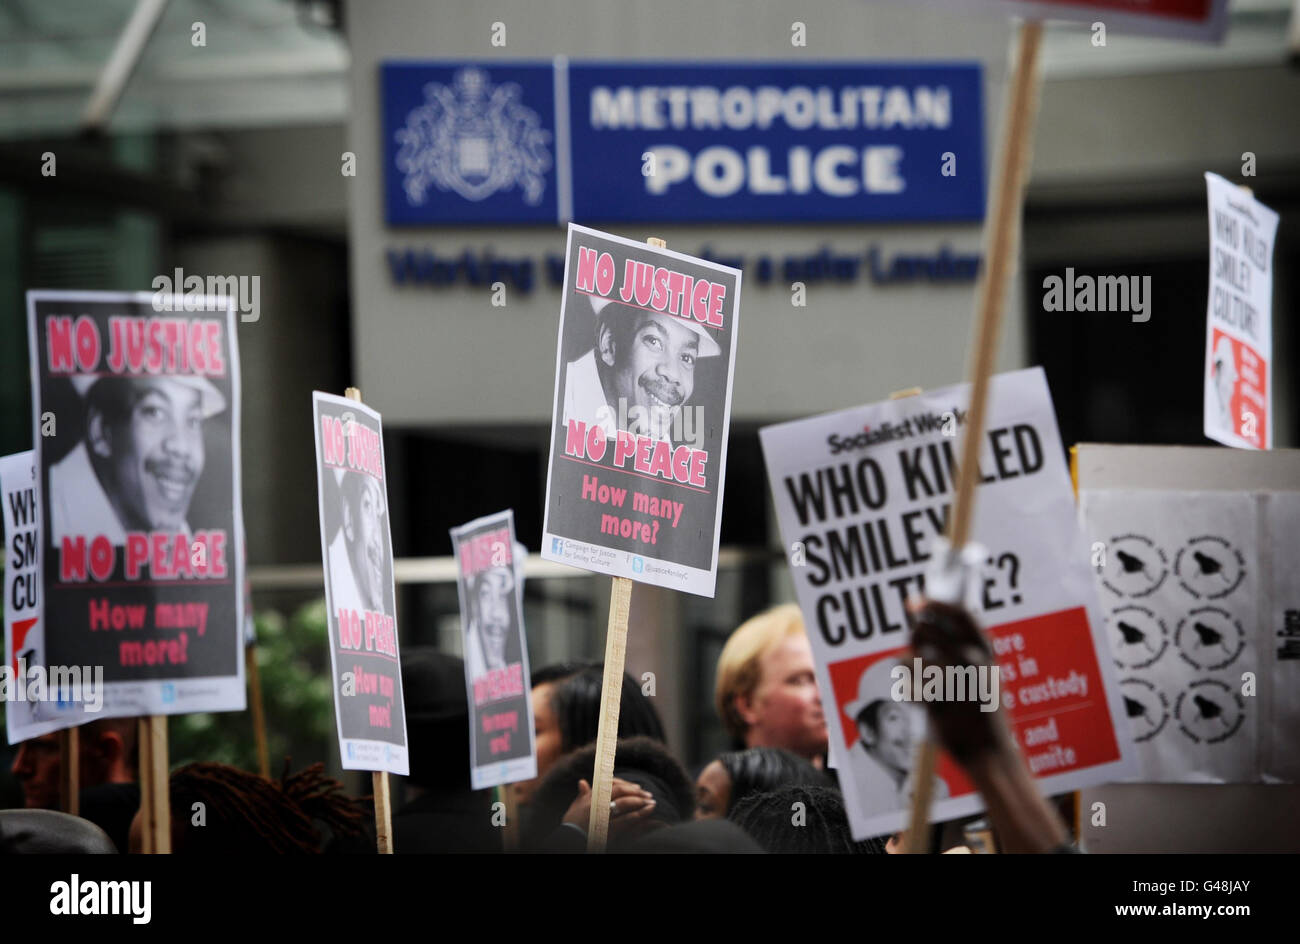 Demonstrators outside New Scotland Yard march in protest of the death of David Emmanuel (also known as Smiley Culture) who died during a raid on his home in Surrey last month. Stock Photo